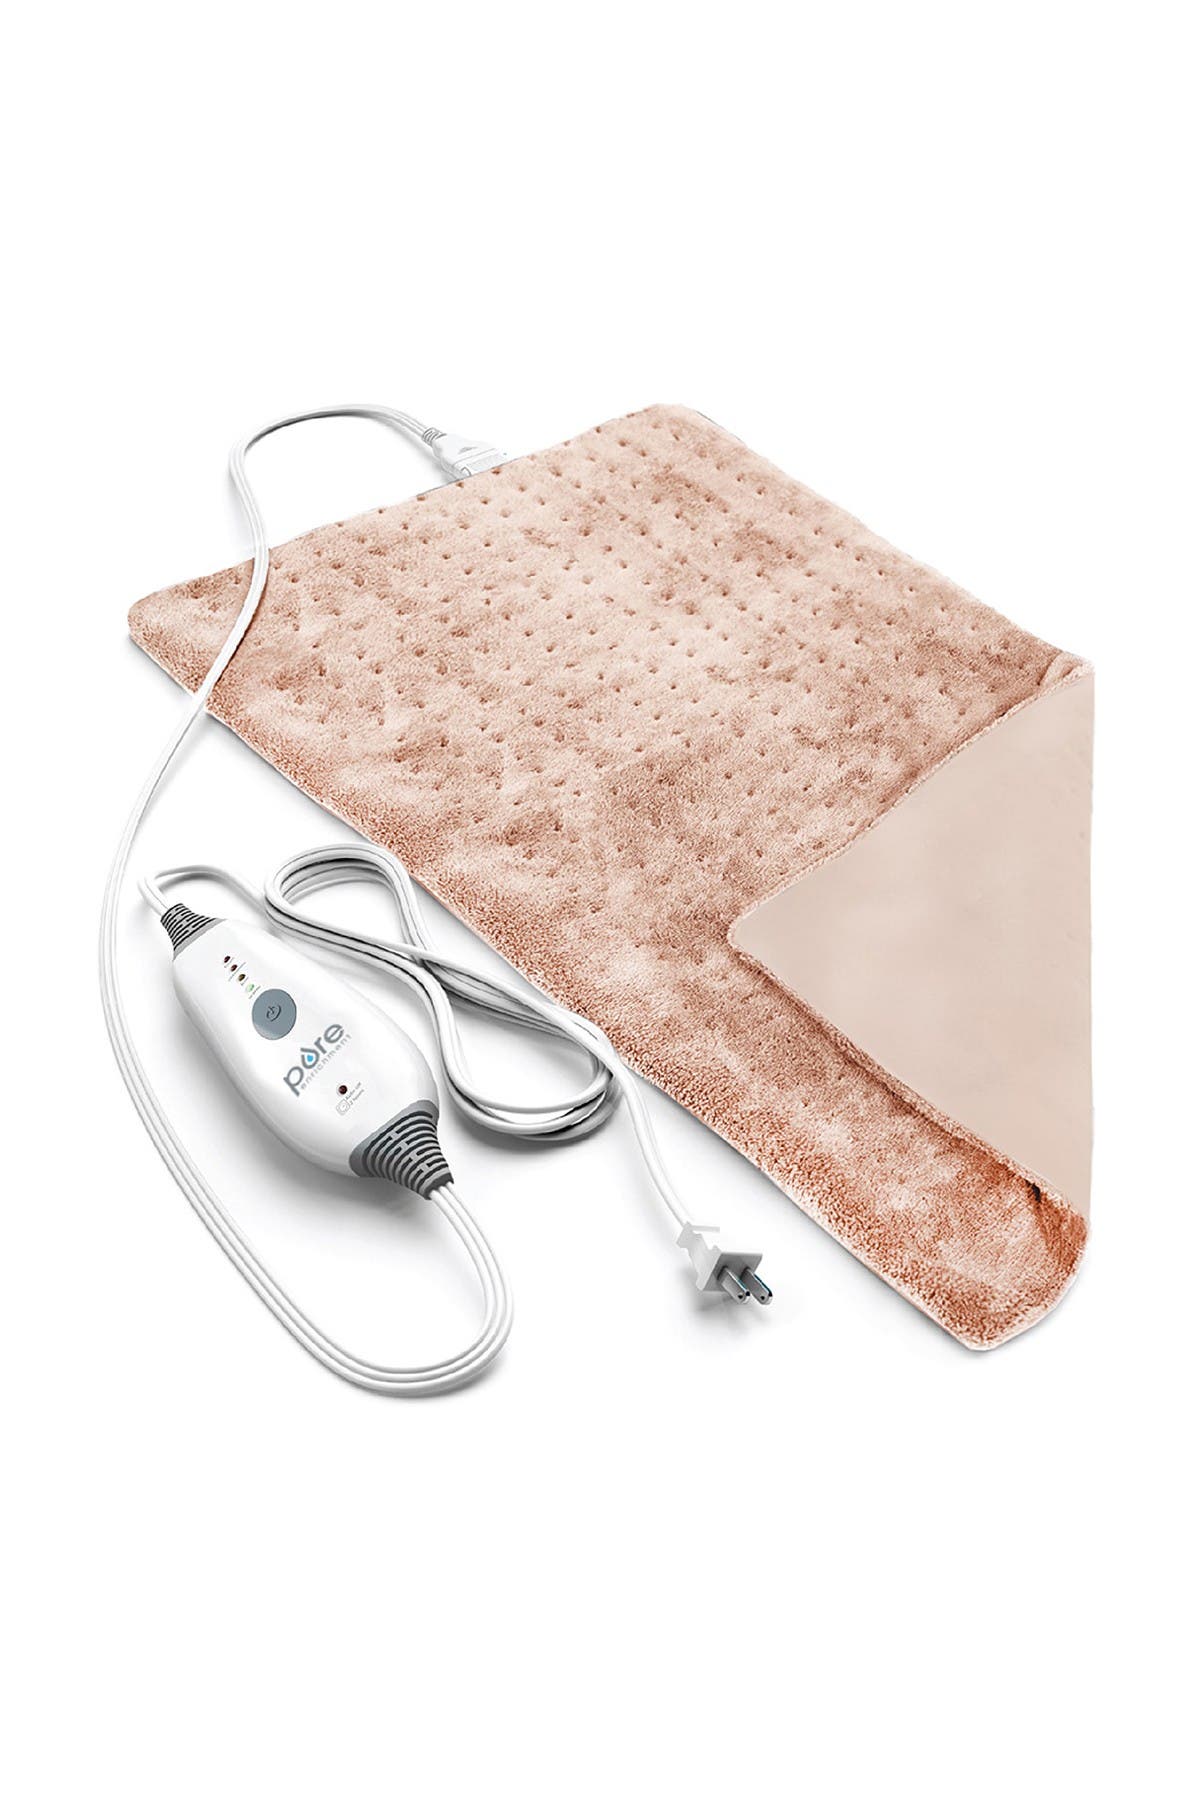 Pure Enrichment Purerelief Deluxe Heating Pad In Mauve